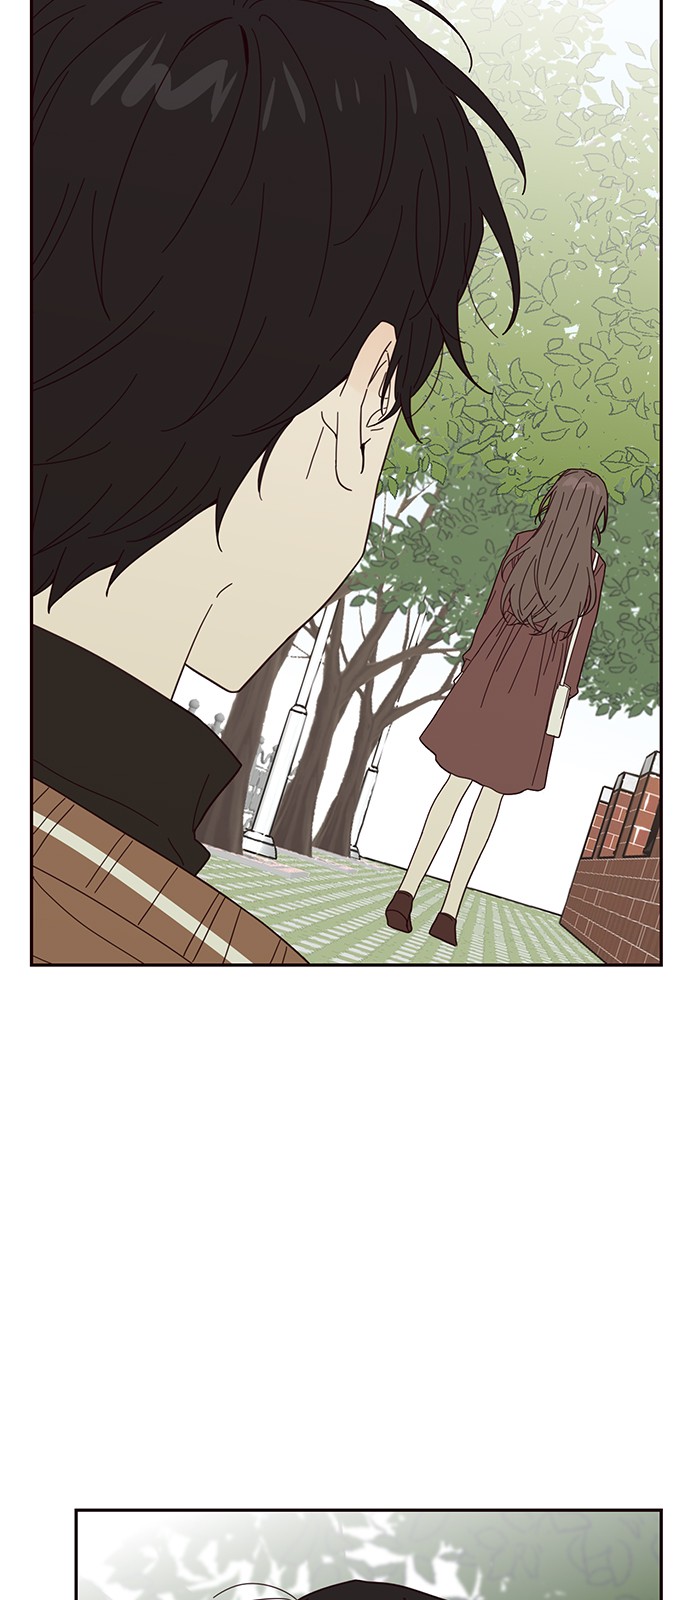 Threads of Love (The Fool of Love and Peace) - Chapter 21 - Page 3